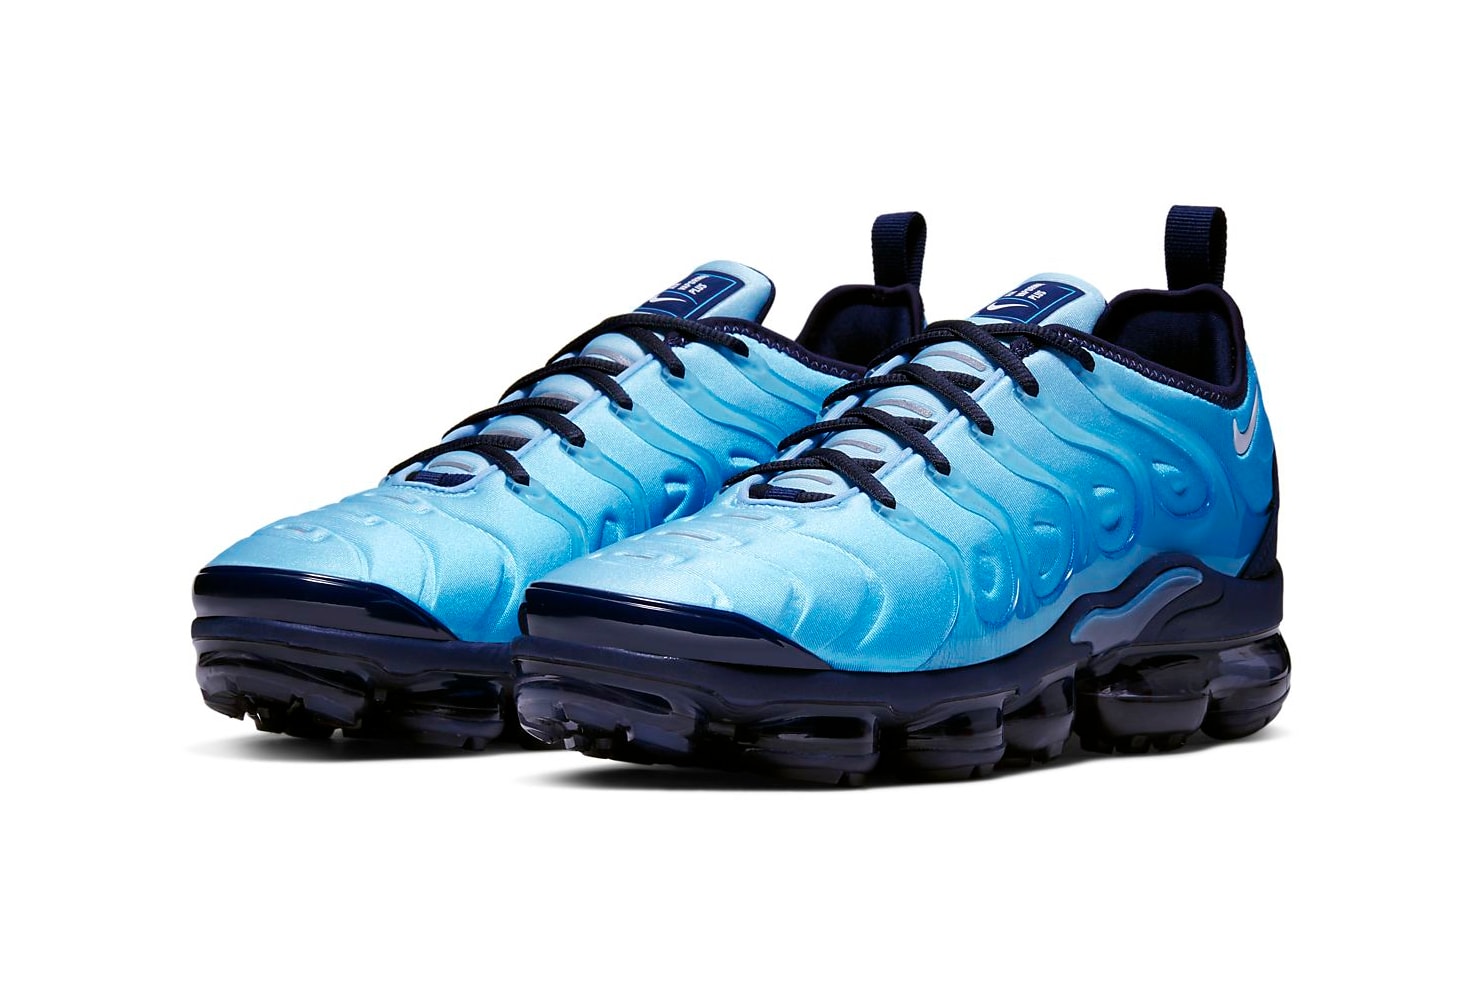 postre Hablar vía Nike Refreshes the Air VaporMax Plus in Light Current Blue | Hypebeast